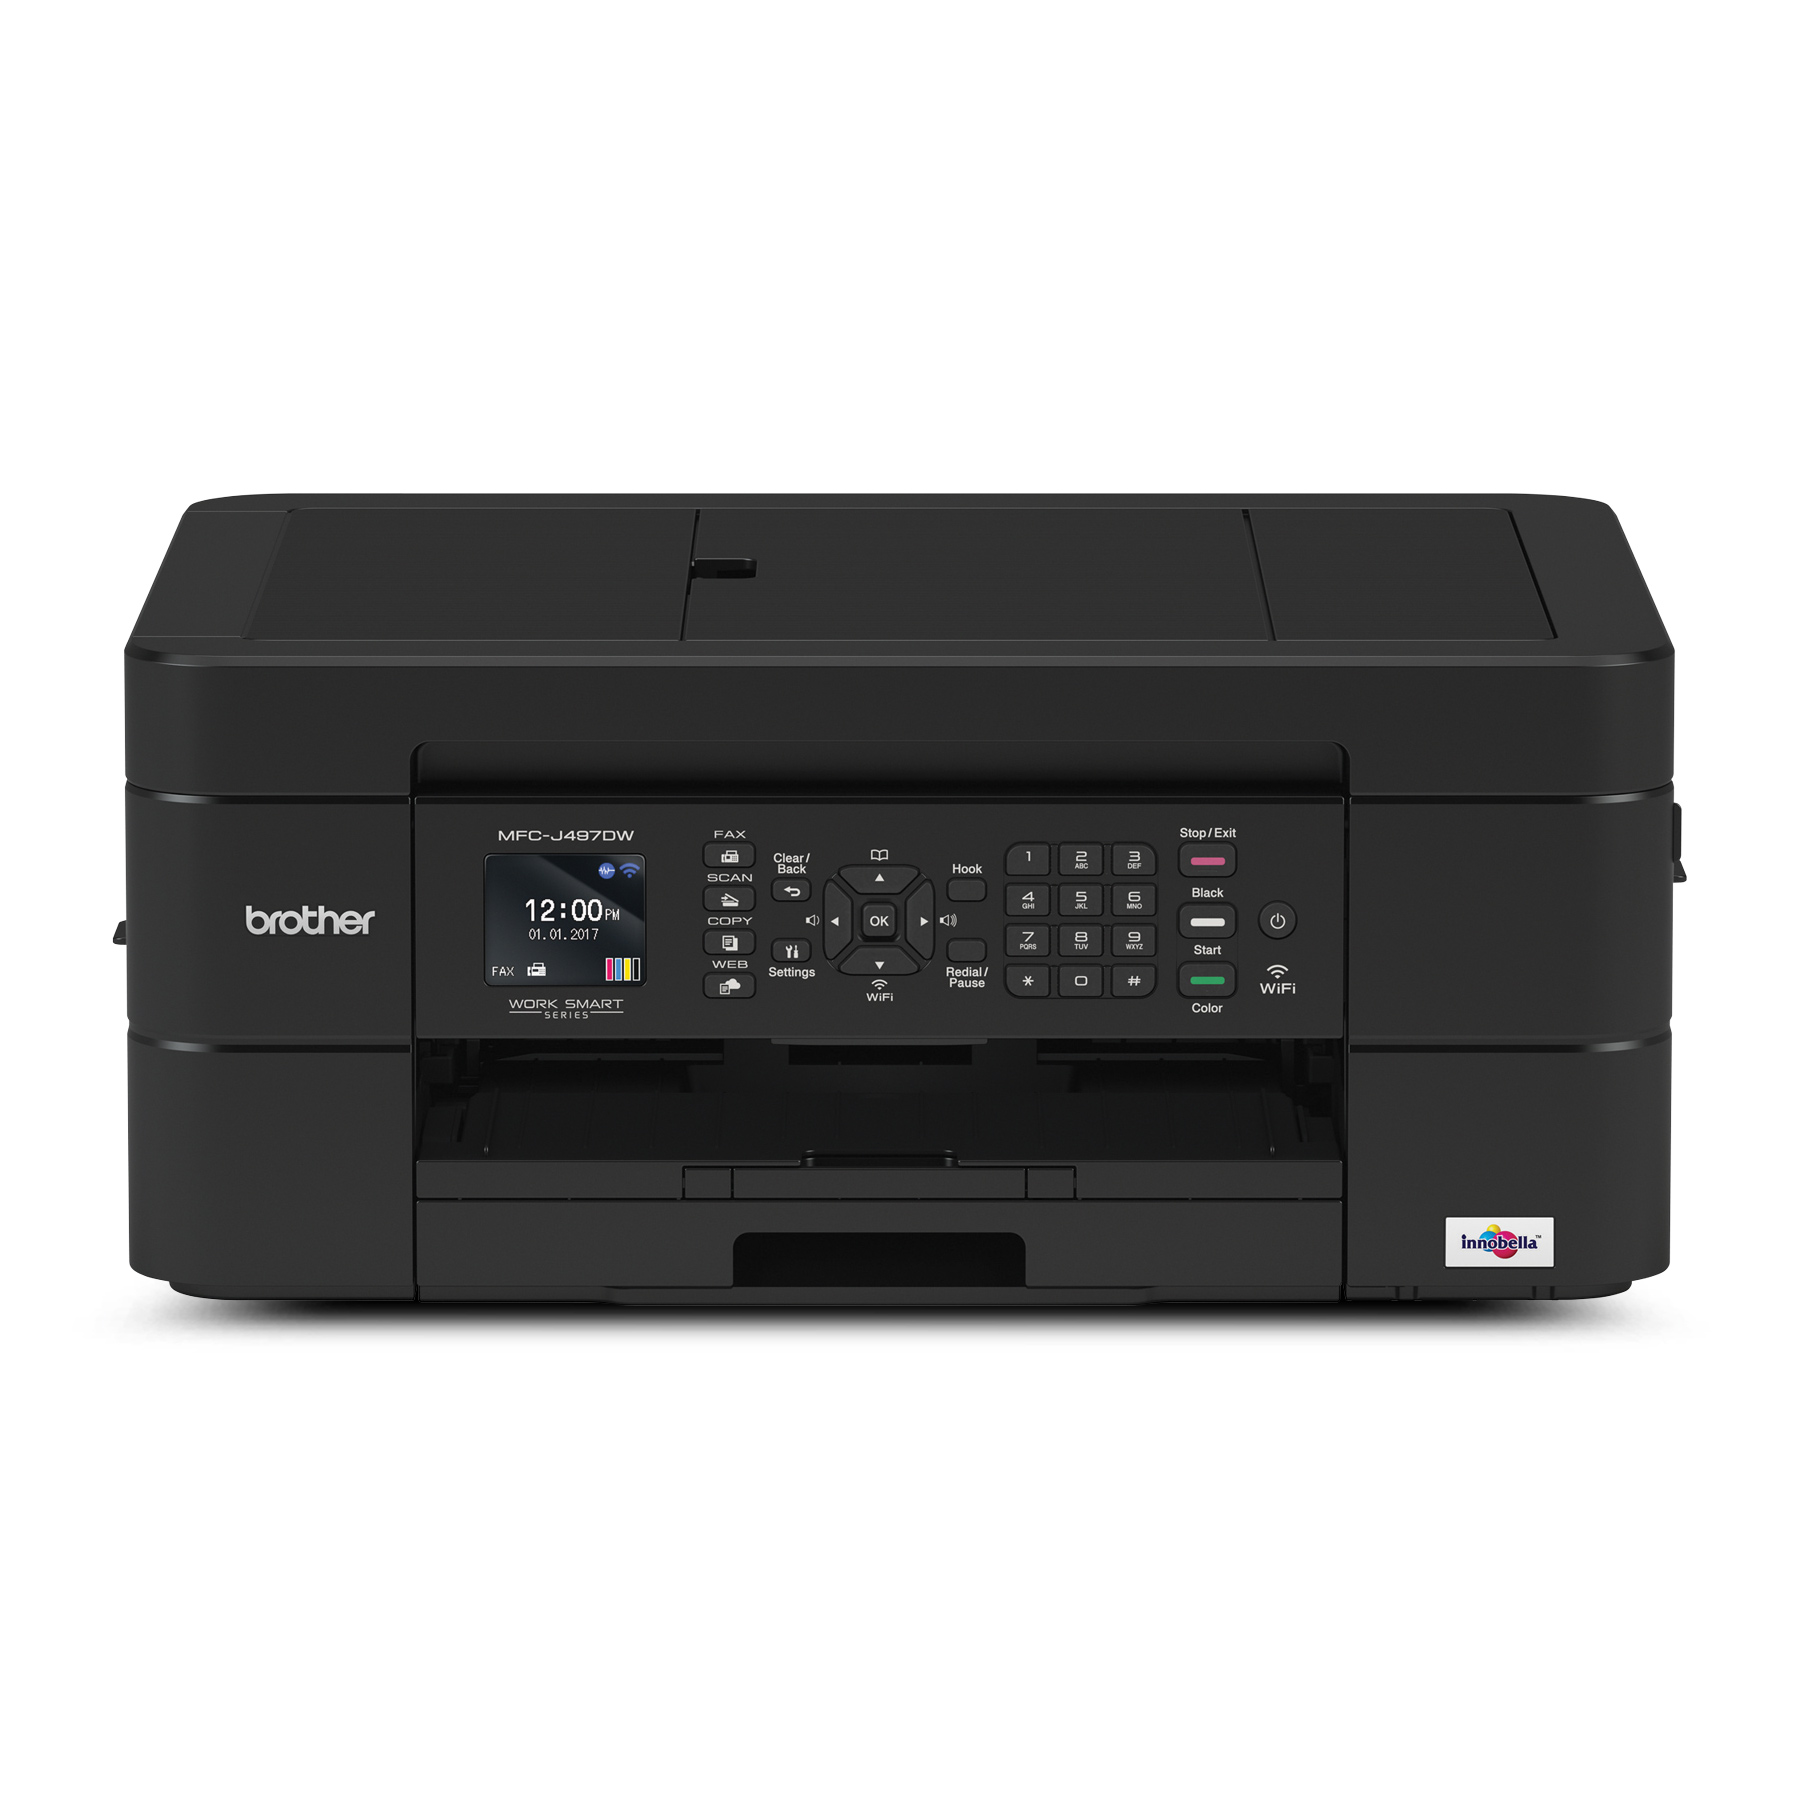 Image of Brother MFC-J497DW Wireless Colour Inkjet Multifunction